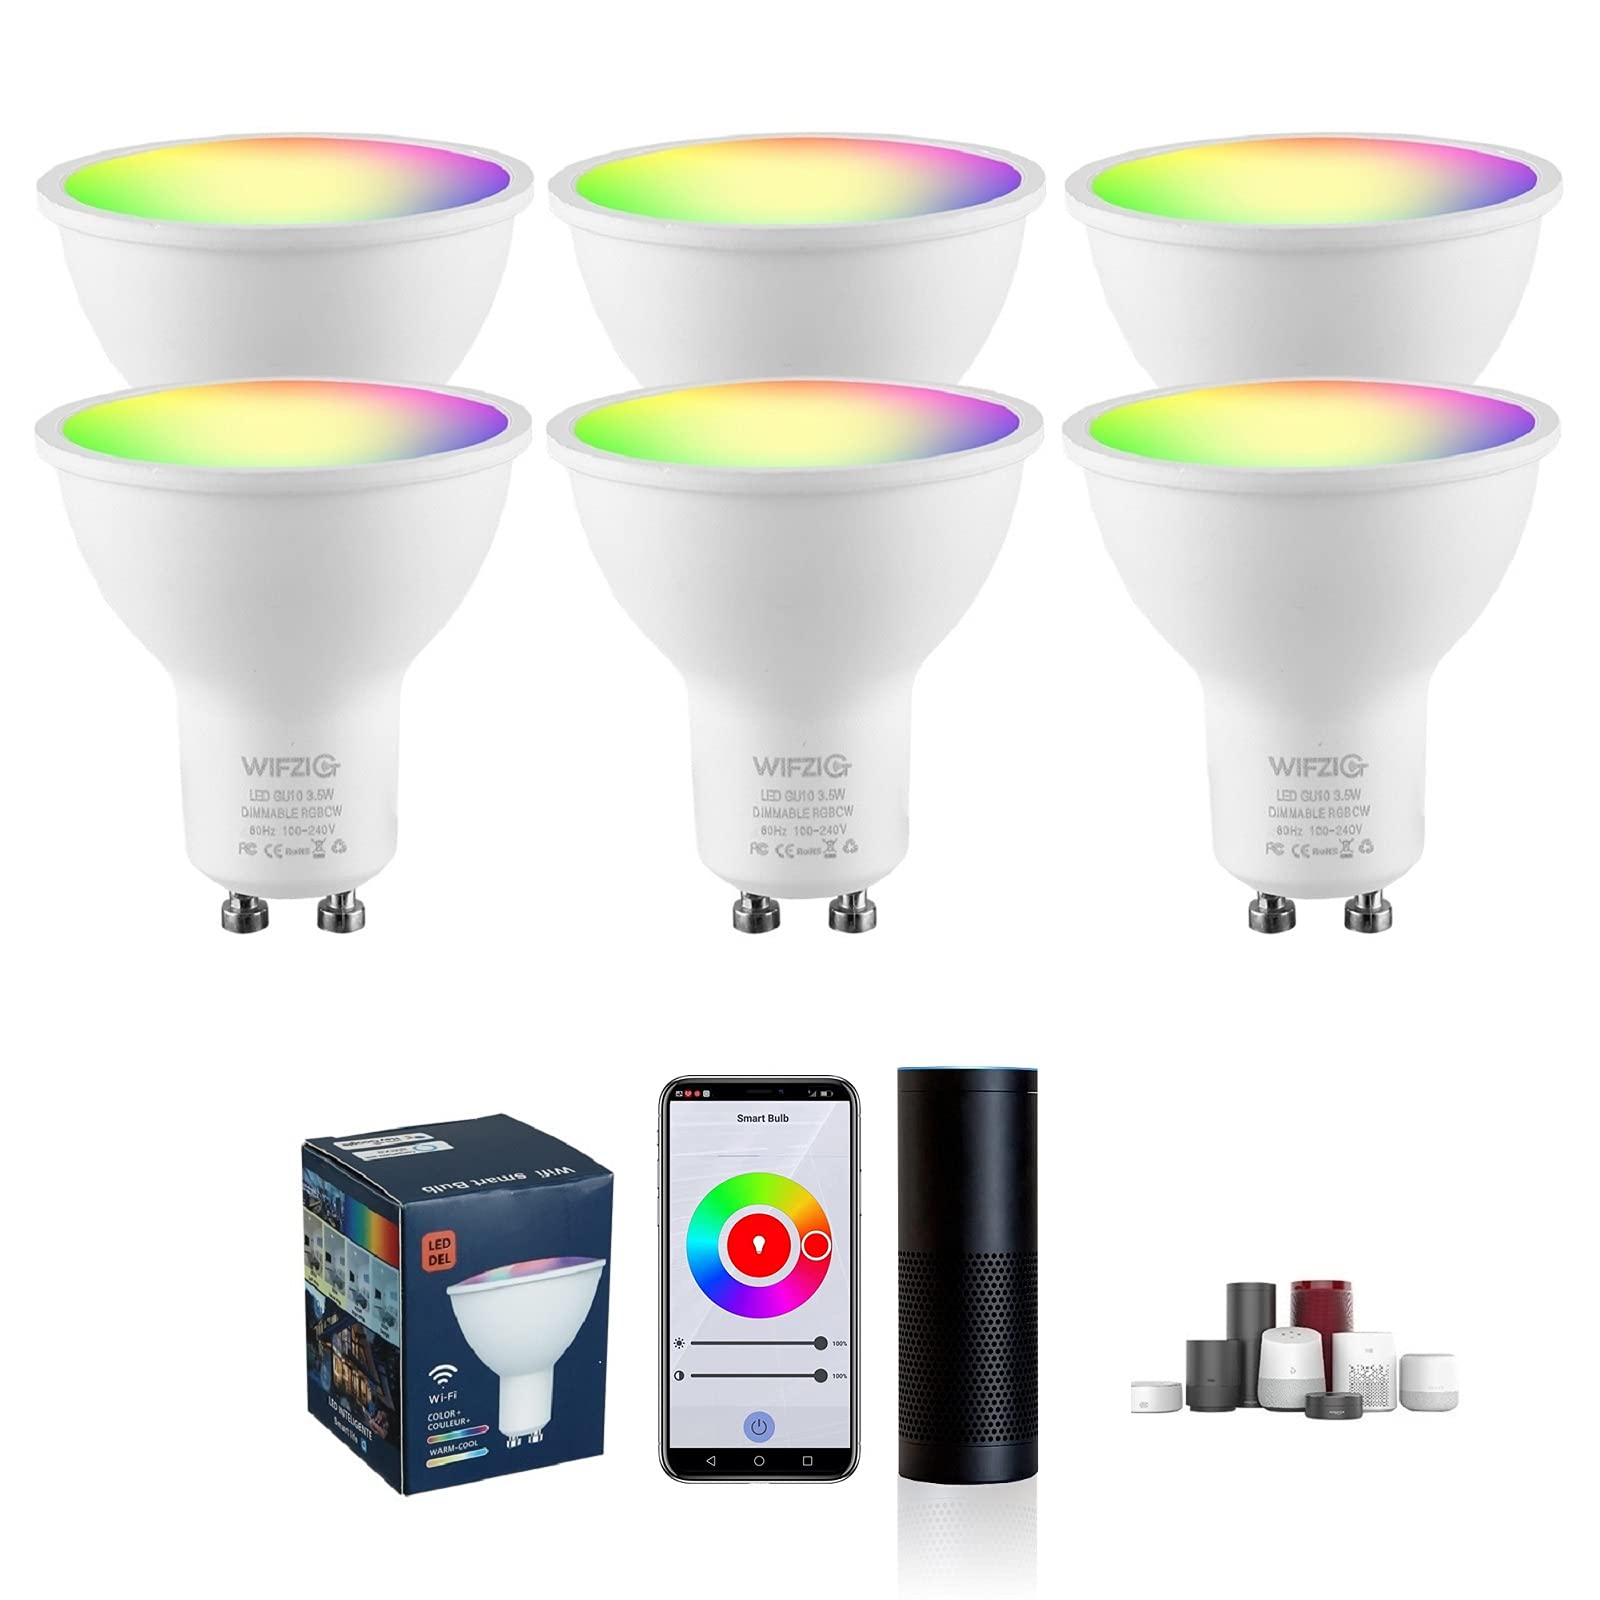 WIFZIG GU10 Smart Bulbs, RGB+CW Color Change Smart gu10 led Bulb,Works with Alexa&Google Assistant, 2700-6500K,Multicolor Track Light Bulb,Dimmable...